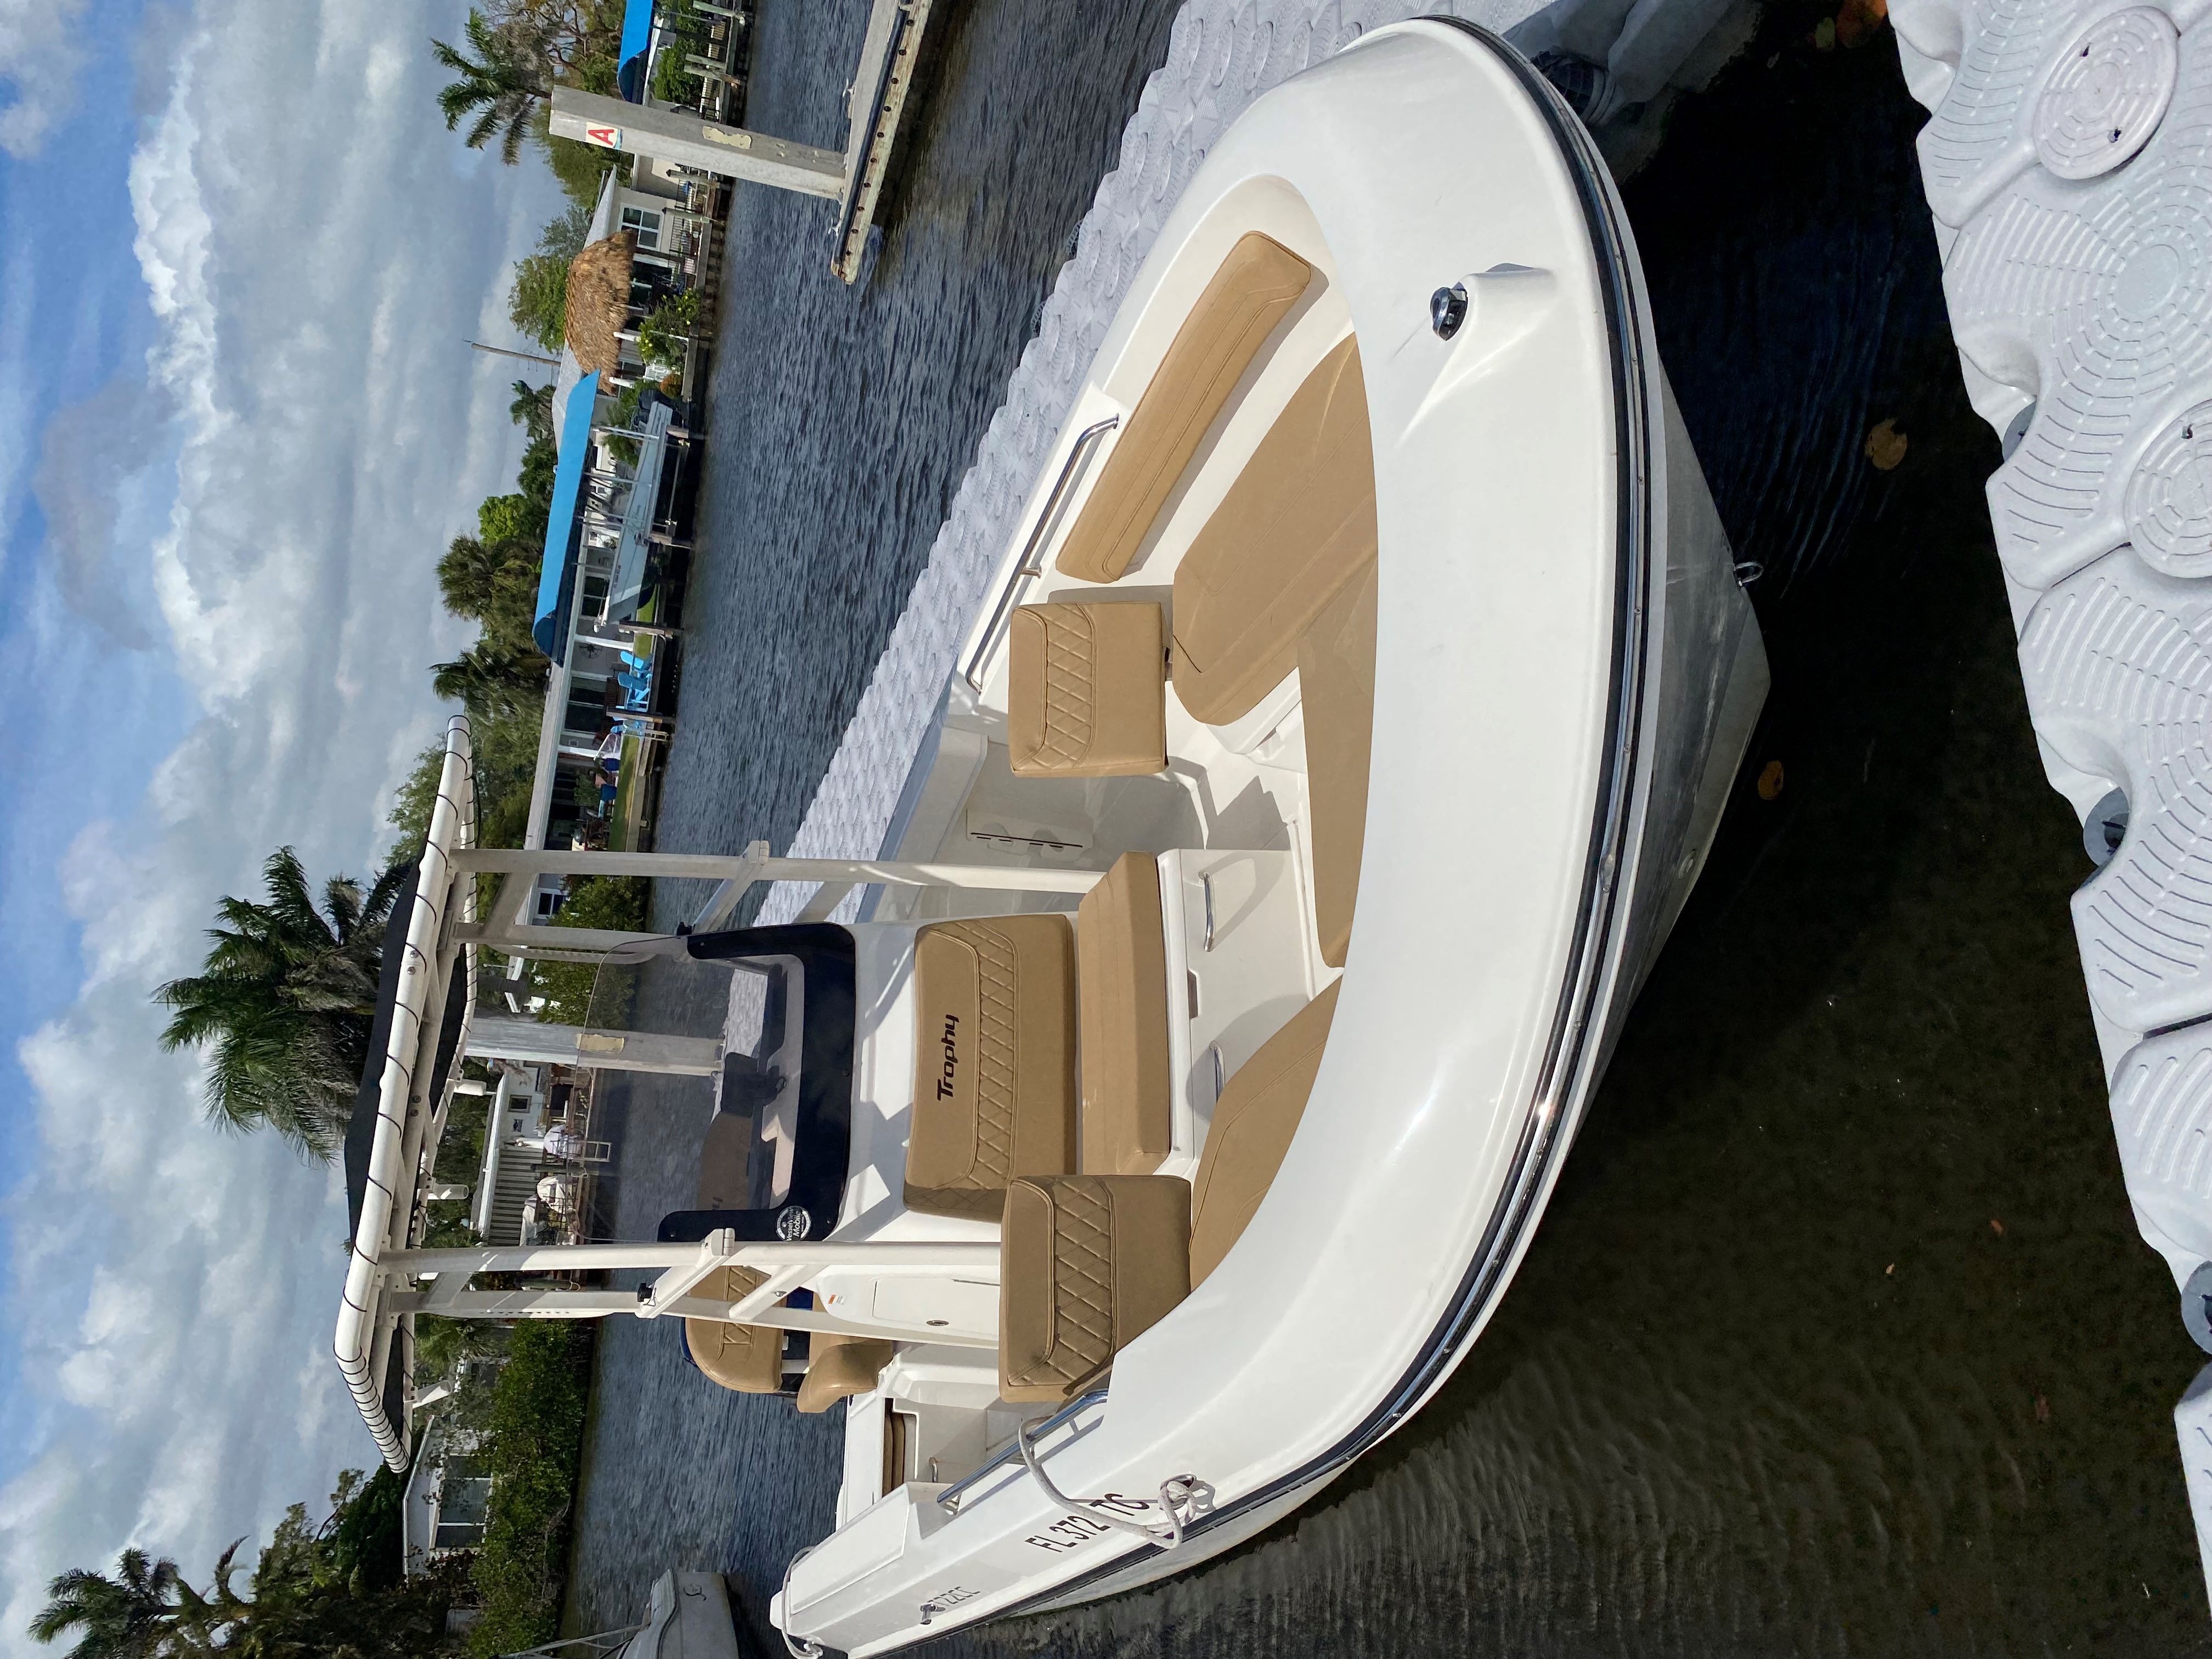 WOLFMAN (23FT Bayliner Trophy Center Console - 150 HP~Fishing)